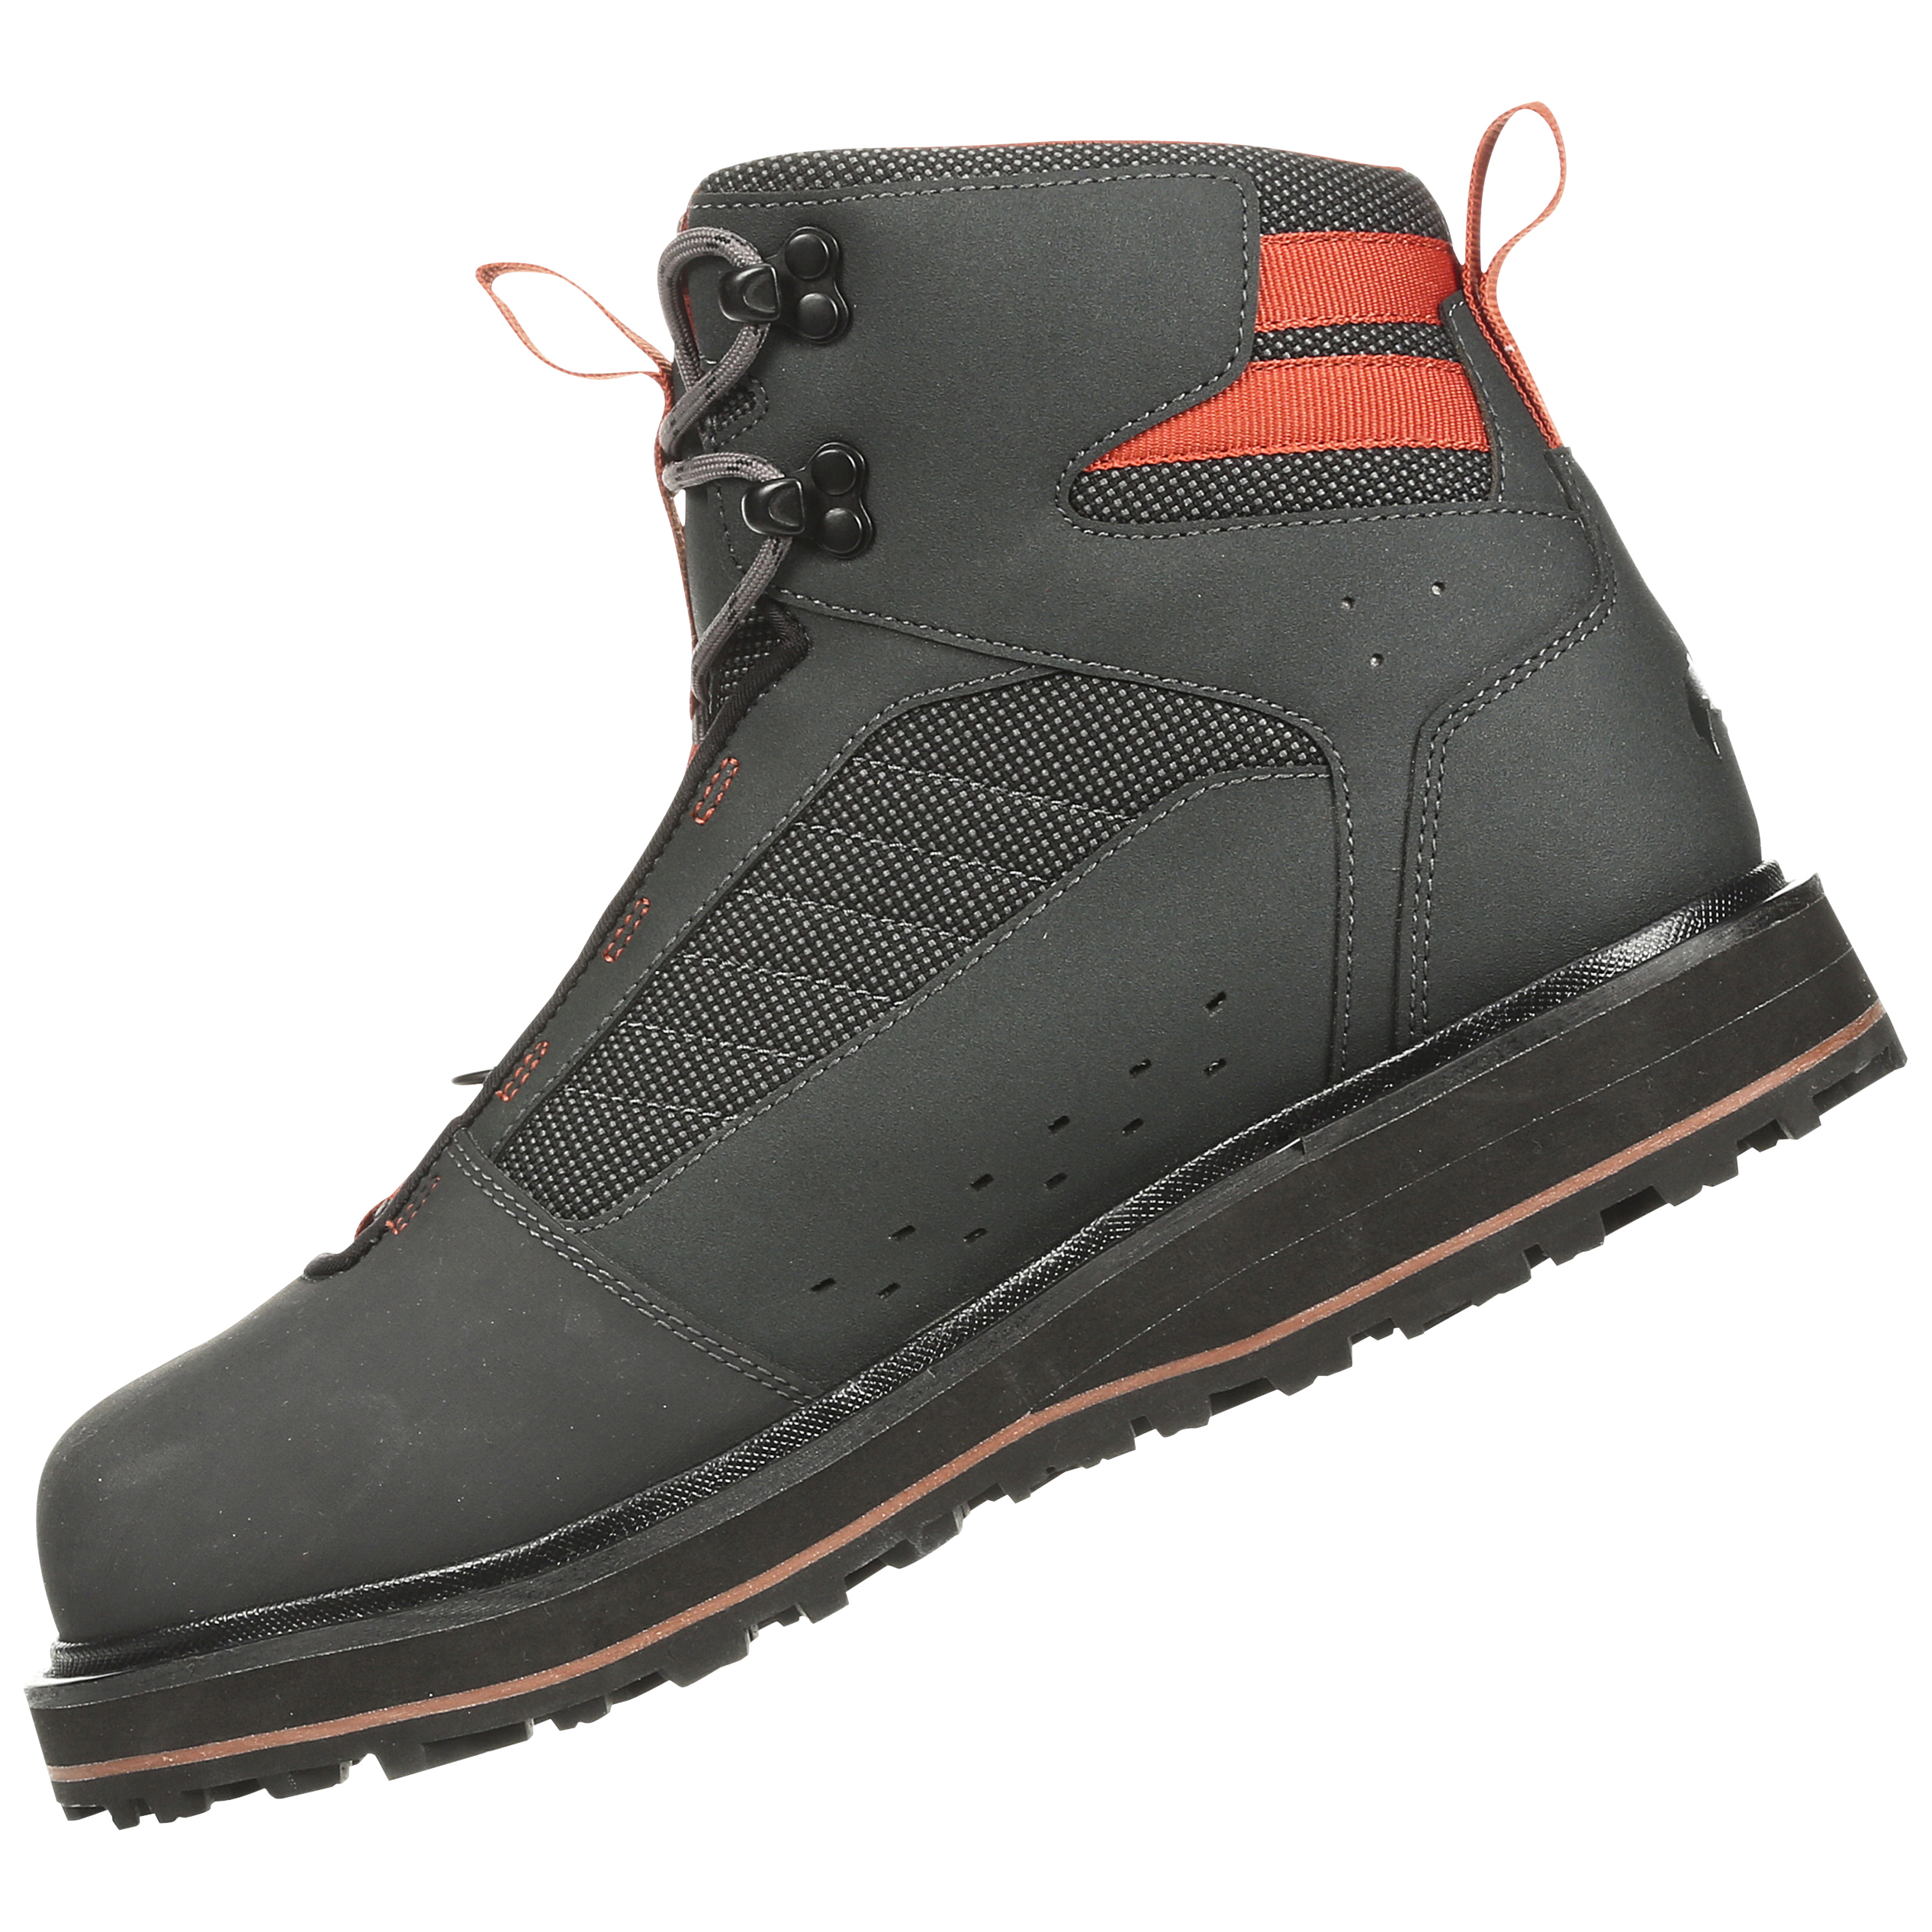 simms tributary boots